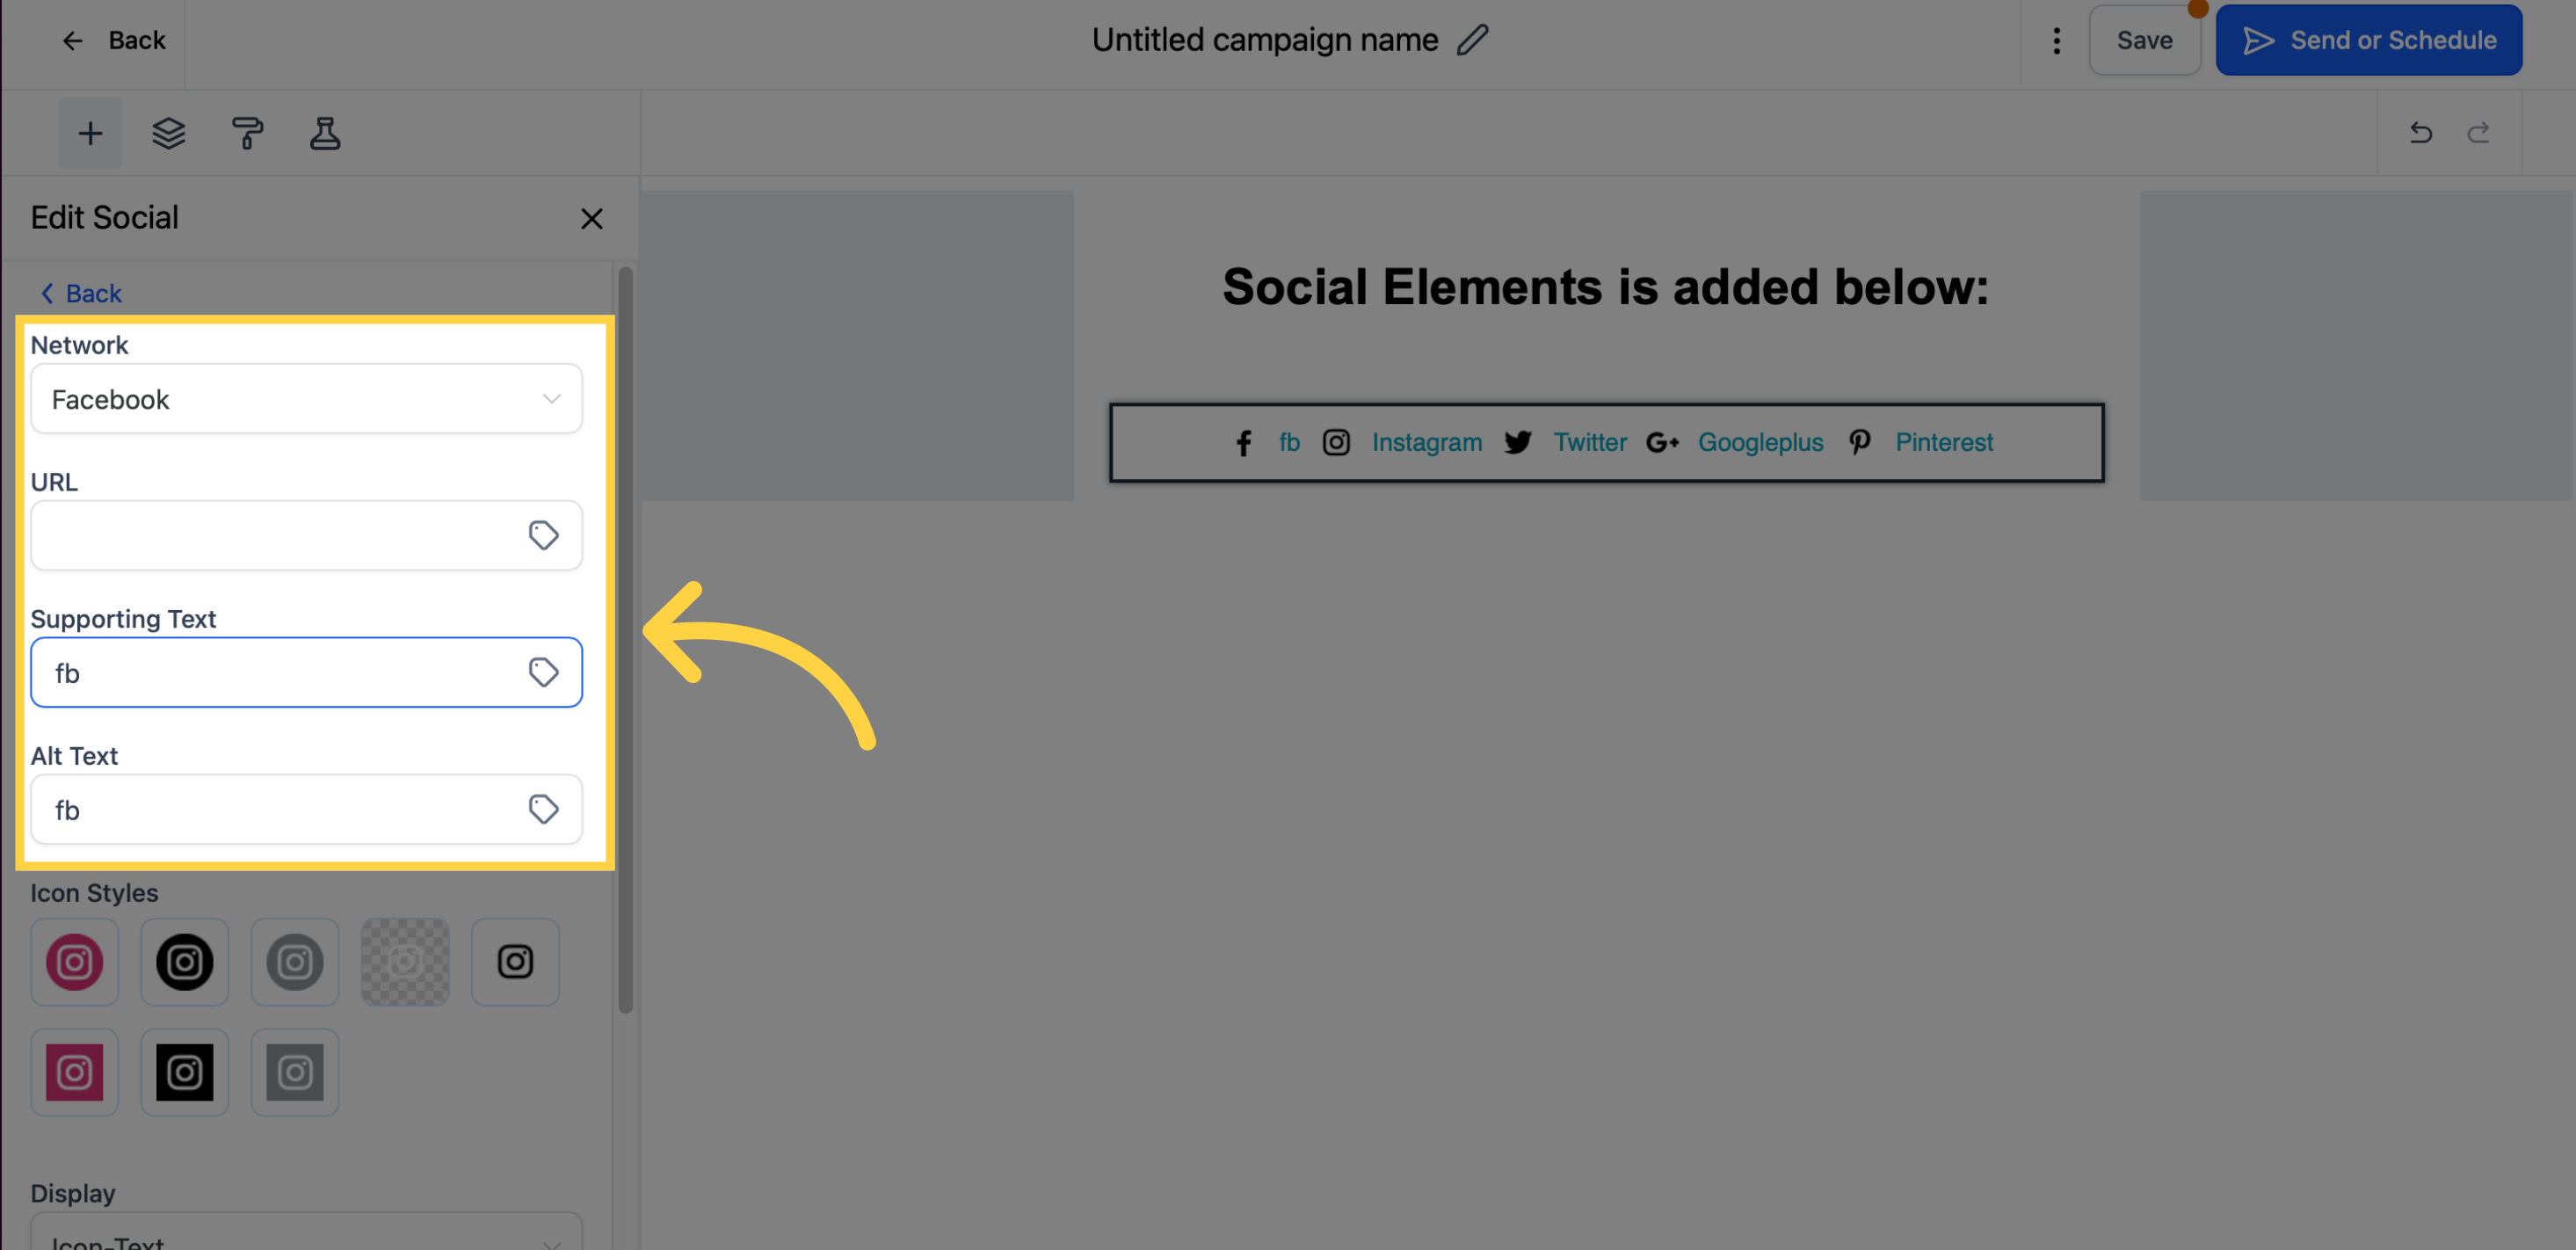 You can edit social details here